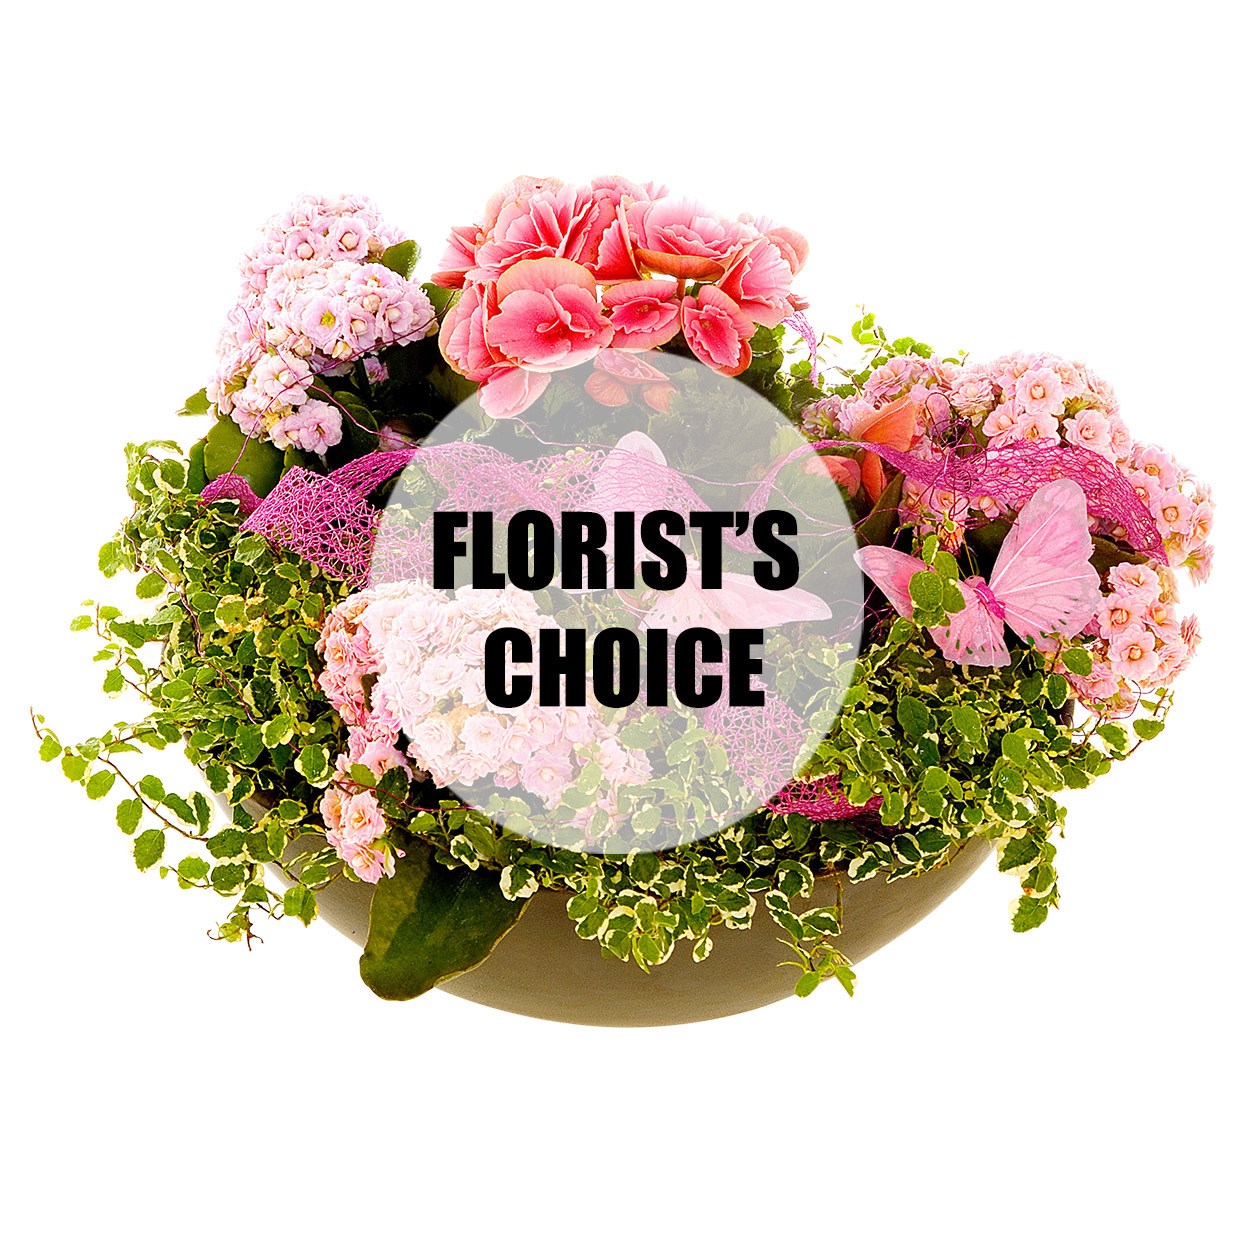 Florist's choice planting in a low bowl